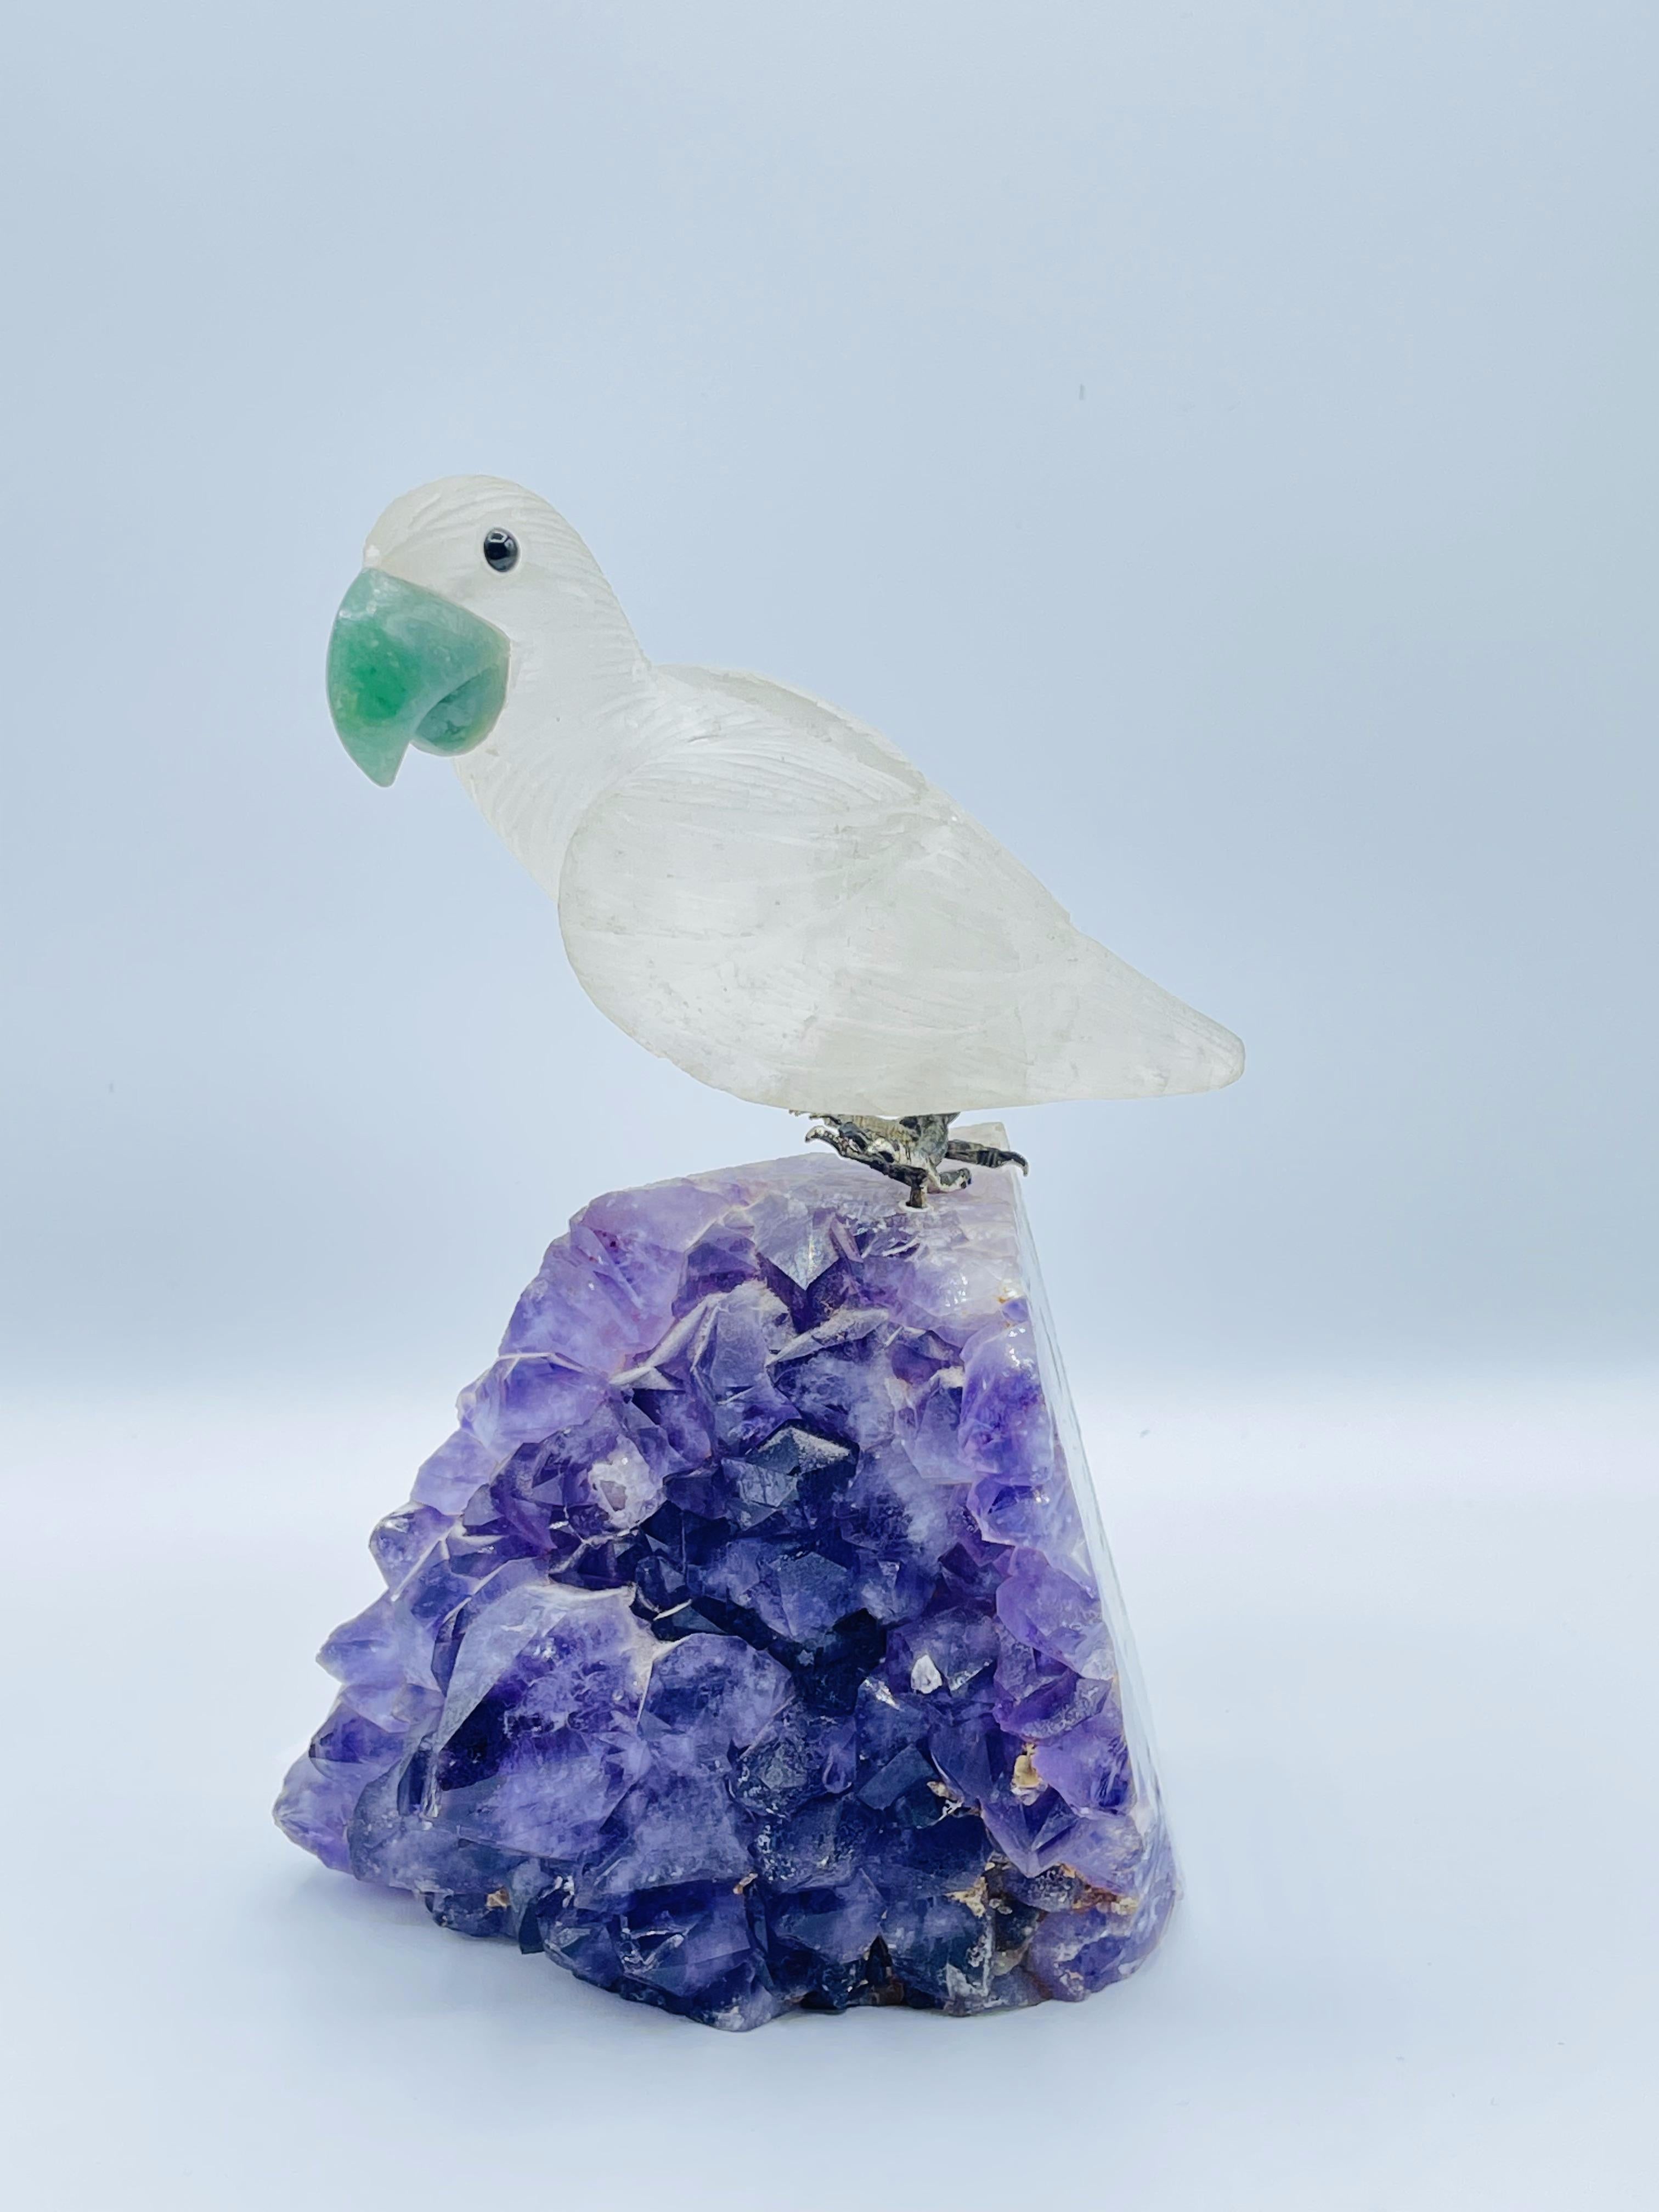 Rock crystal and amethyst Geode sculpture of a carved parrot bird with jade.

Very nice sculpture carving of a rock crystal bird with jade eyes, sitting on a amethyst geode stone.

Good condition. Ready to place.

Measures: 7.5